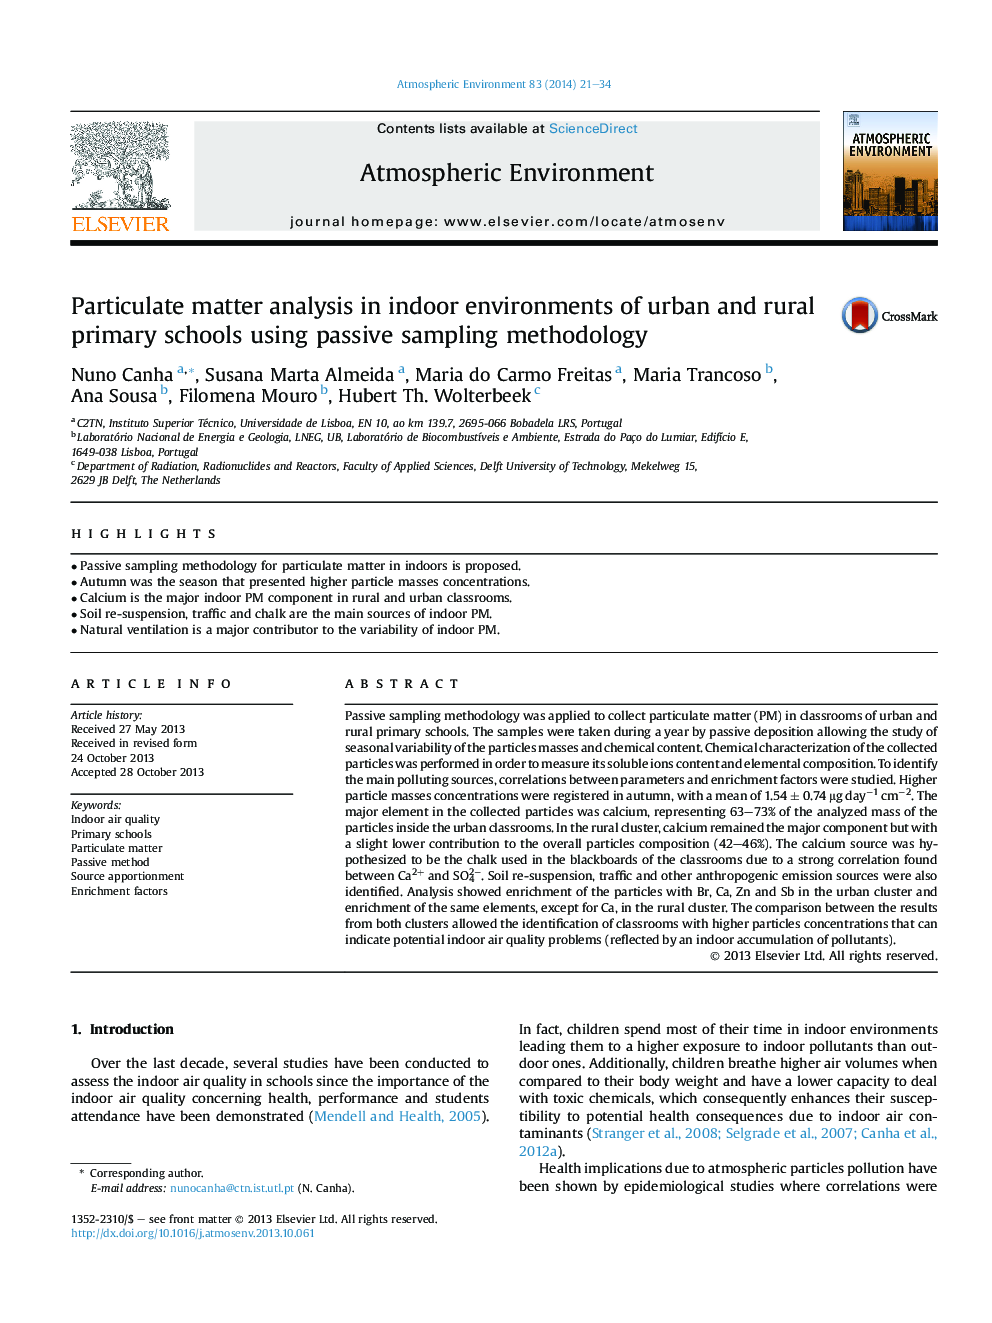 Particulate matter analysis in indoor environments of urban and rural primary schools using passive sampling methodology